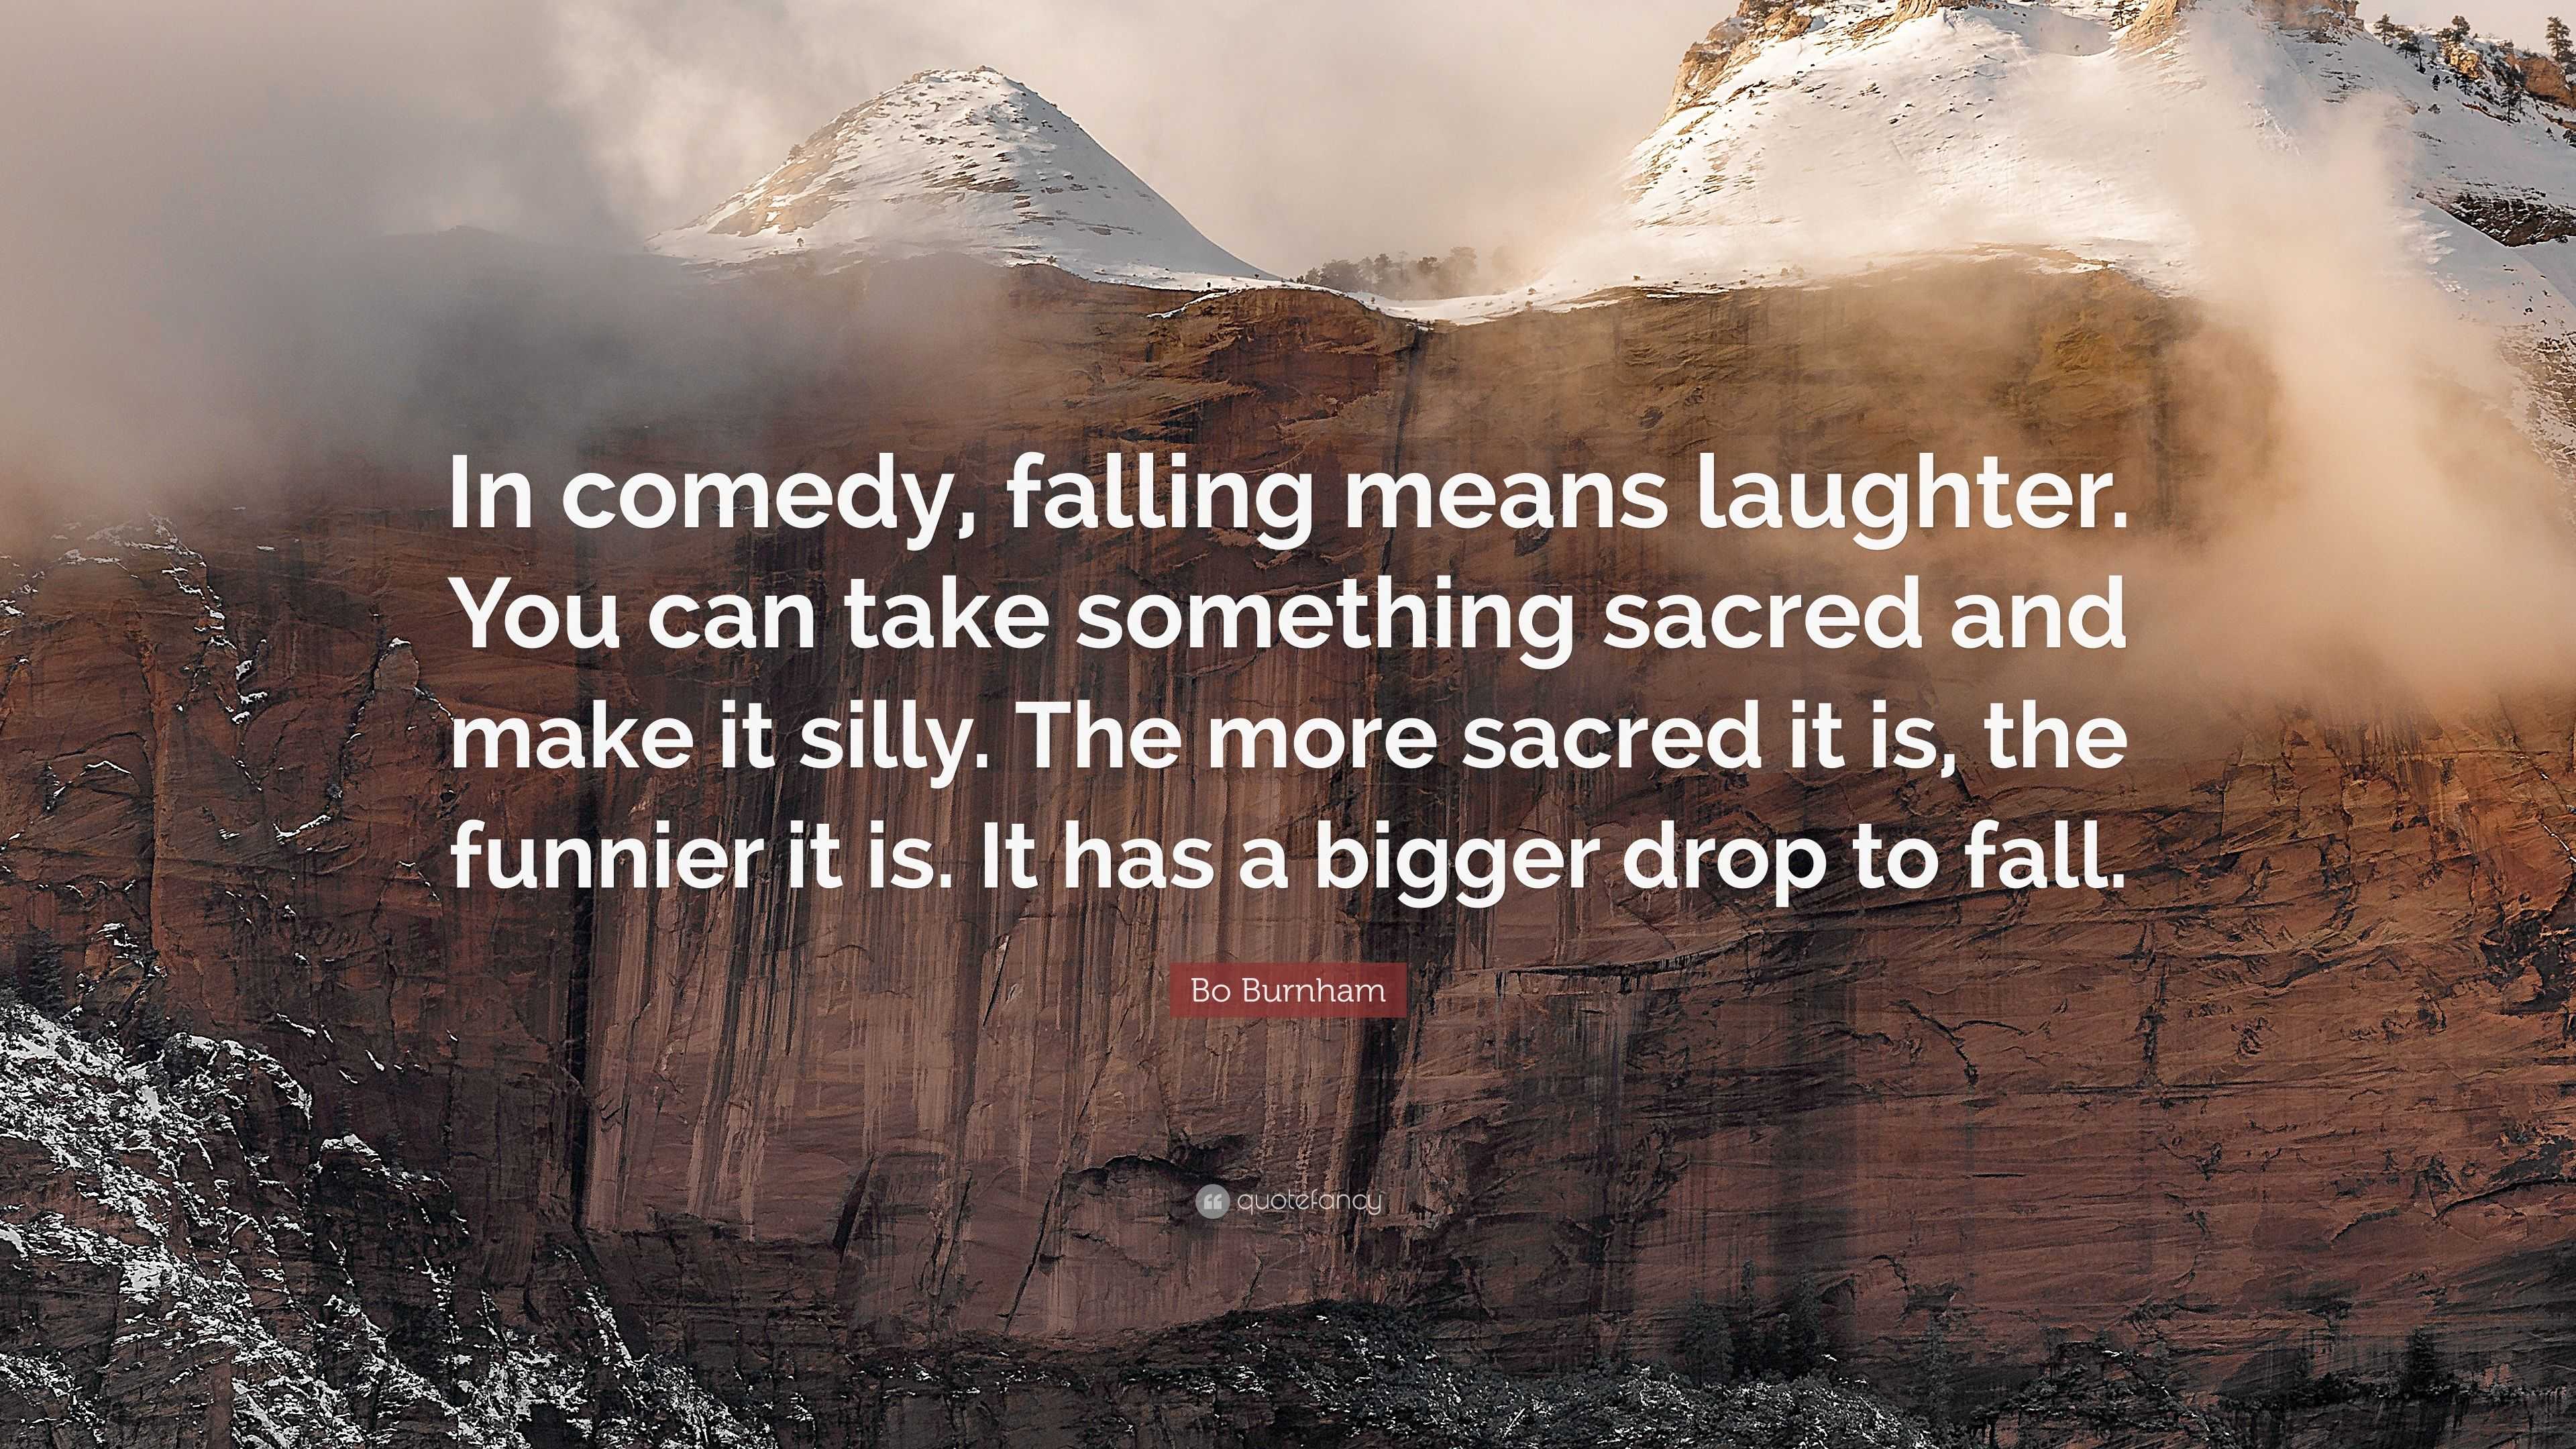 Bo Burnham Quote “In edy falling means laughter You can take something